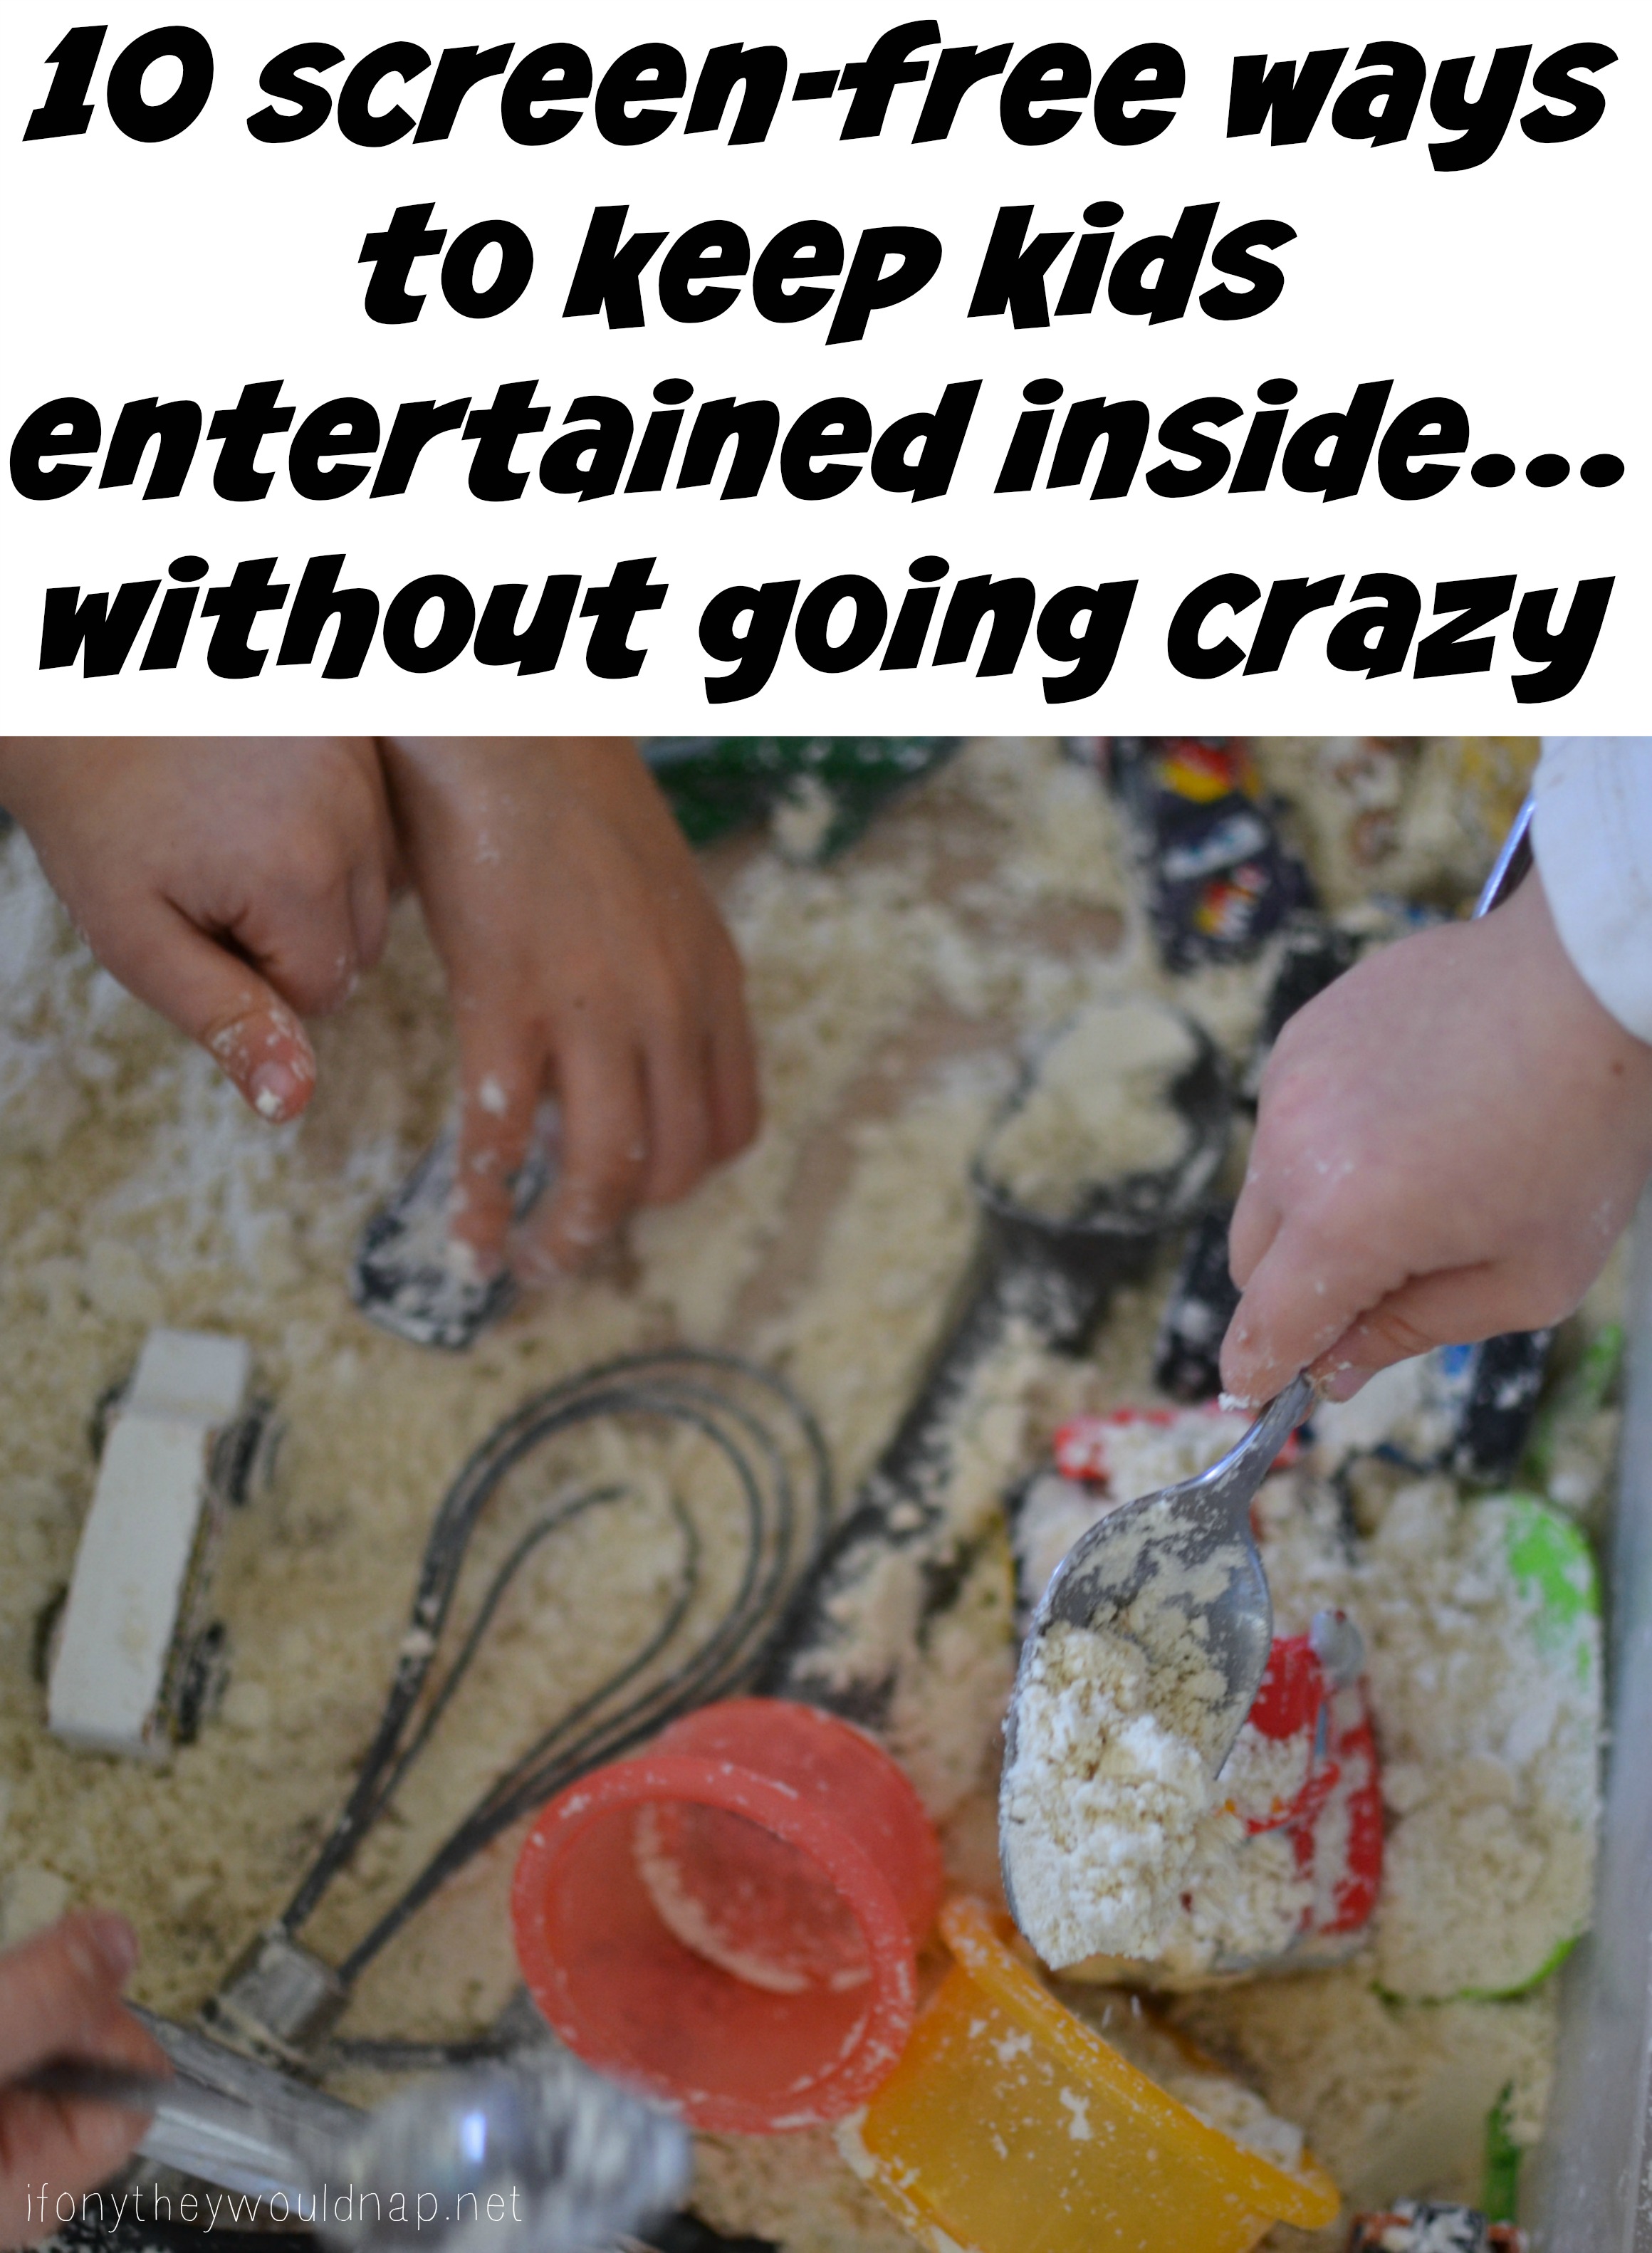 10 screen-free ways to keep kids entertained inside… without going crazy